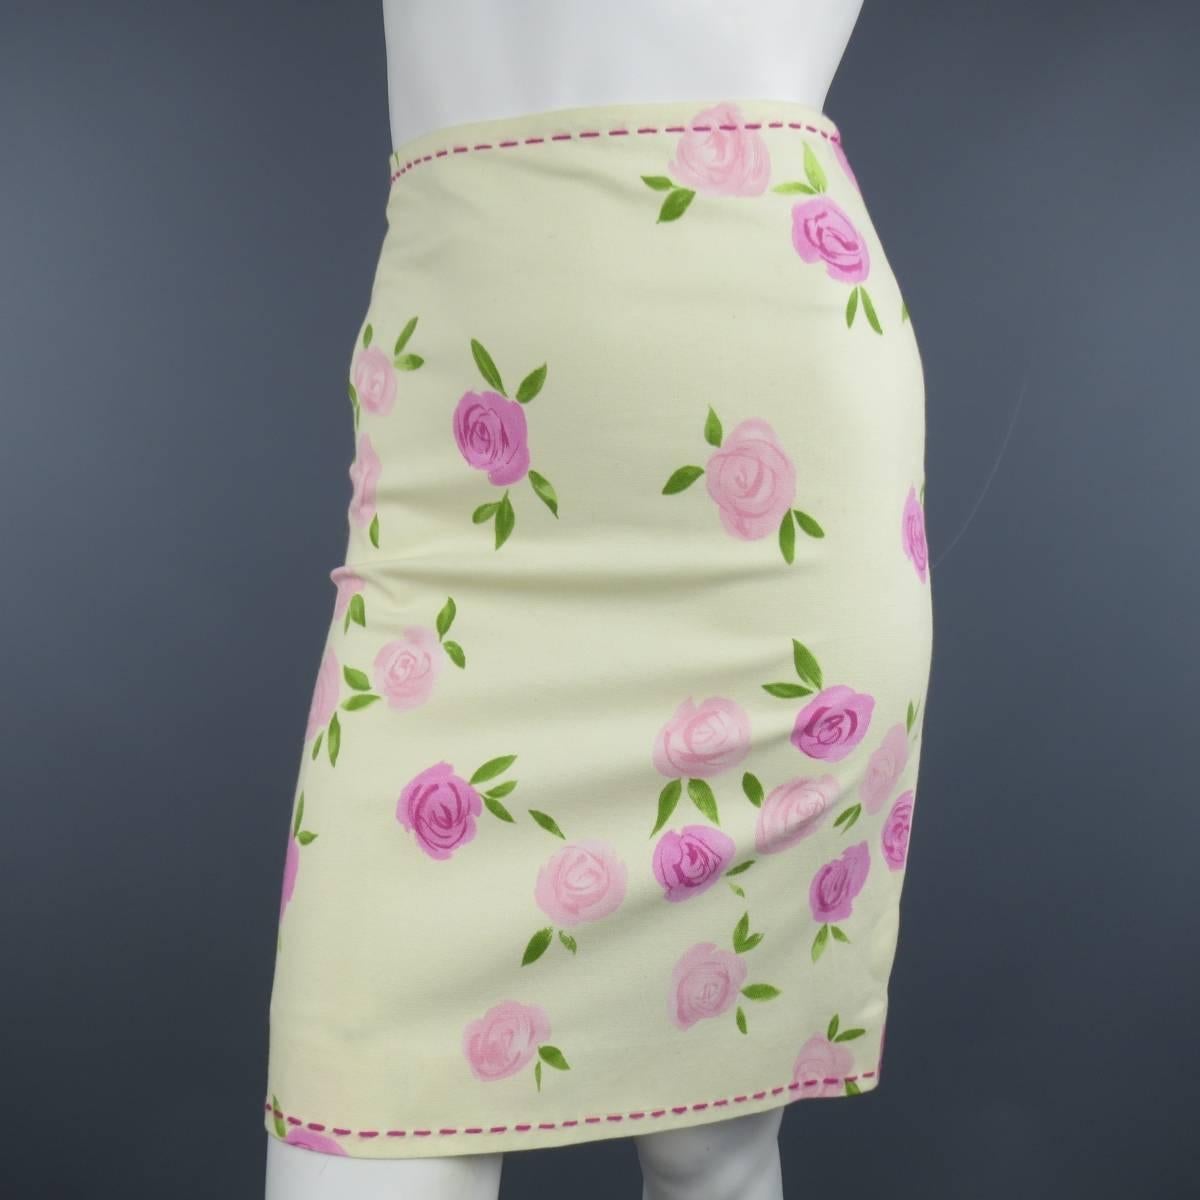 MOSCHINO CHEAP & CHIC pencil skirt in a soft yellow tone beige cotton canvas with all over pink and fuchsia rosette print and features top stitching along the hem lines. Made in Italy.
 
Excellent Pre-Owned Condition
Marked: 4 USA
 
Measurements:
